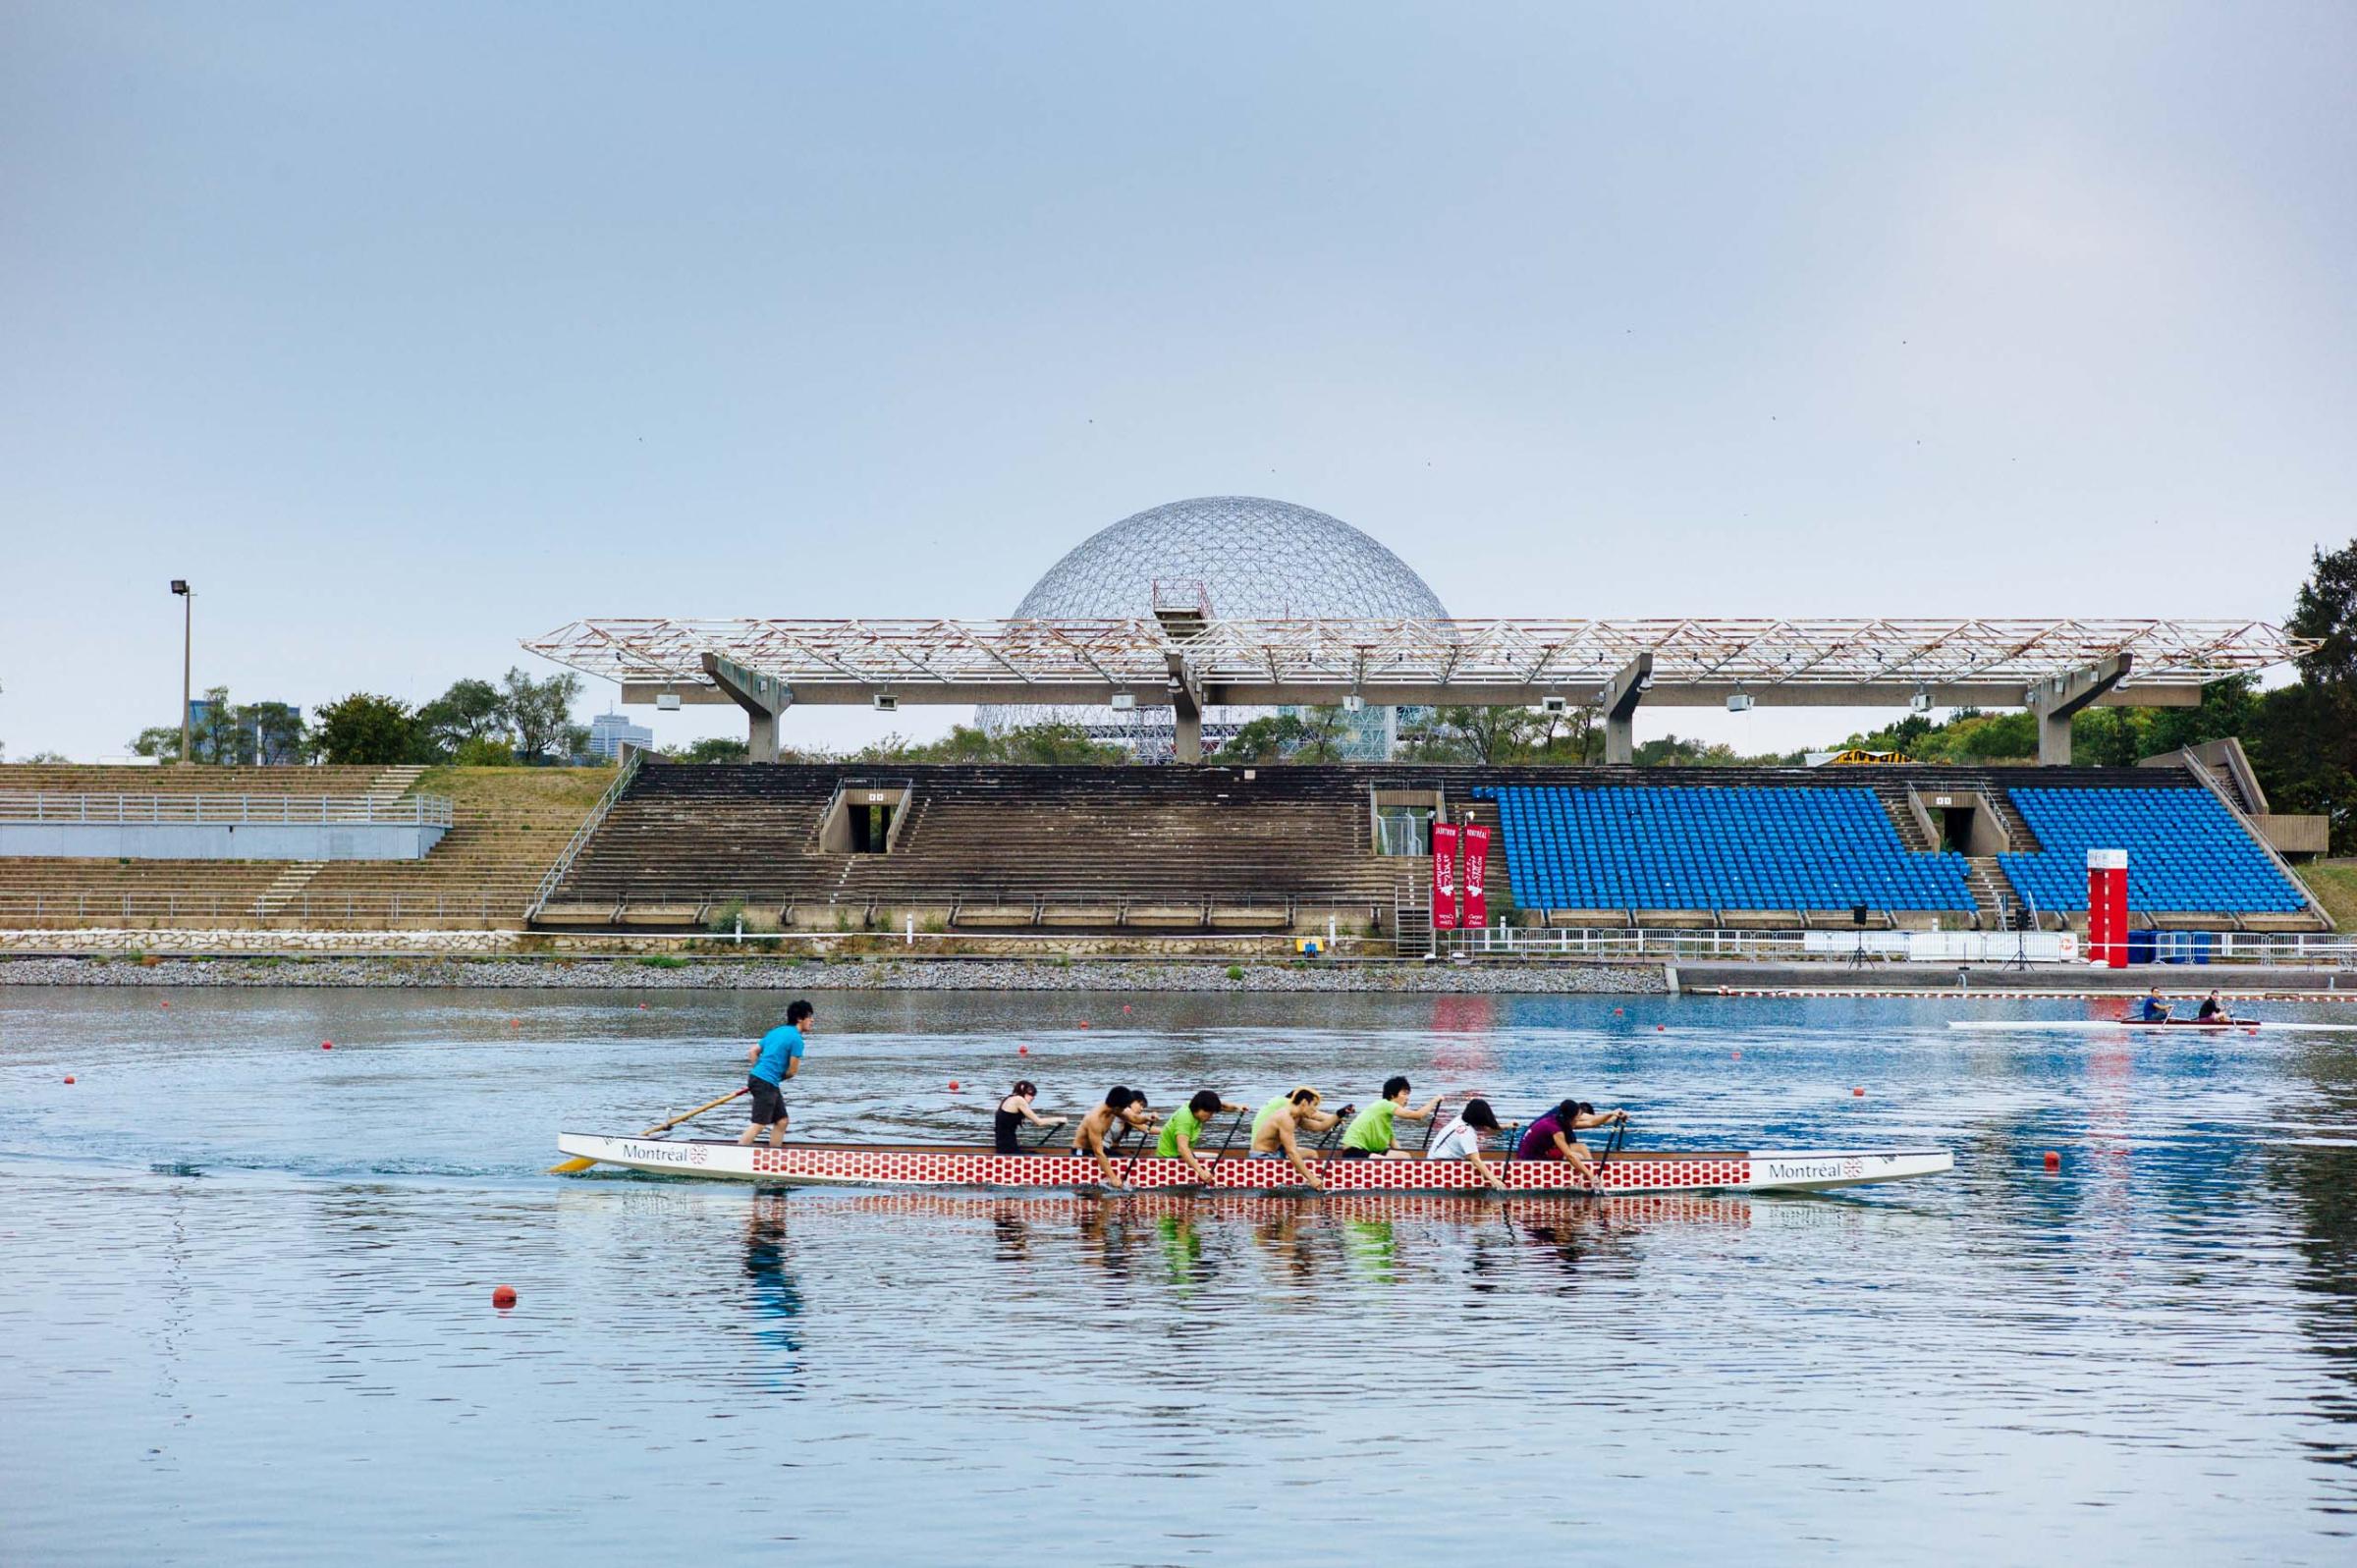 A group of rowers at the Olympic Basin in Montreal, host of the 1976 Summer Olympics, photographed in September 2012. Competitions for canoe-kayaking, rowing and other sports are still held at the site.